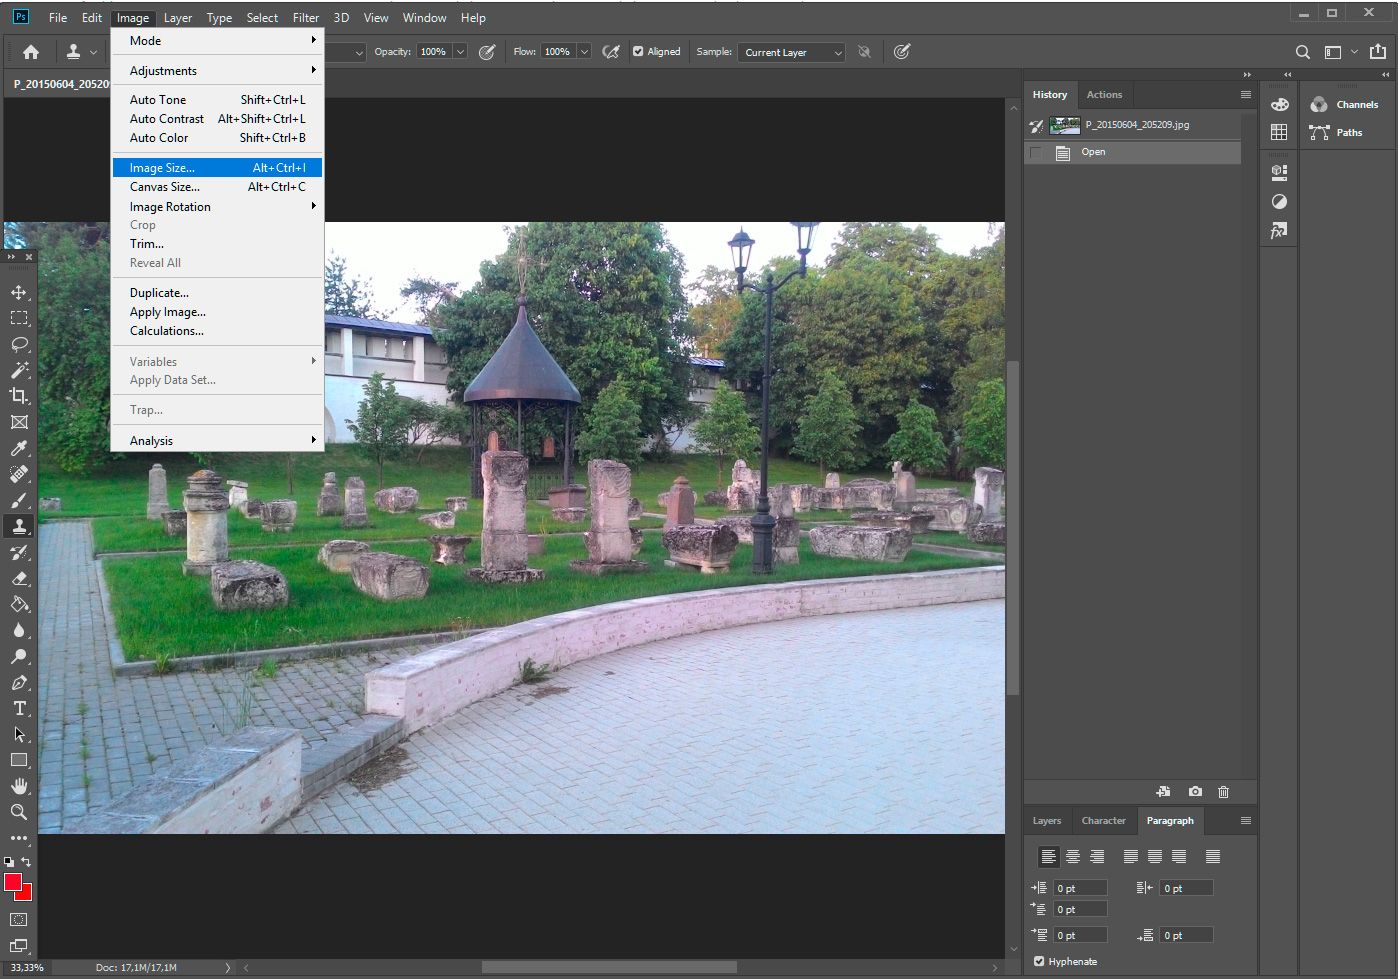 Open image size in Photoshop..